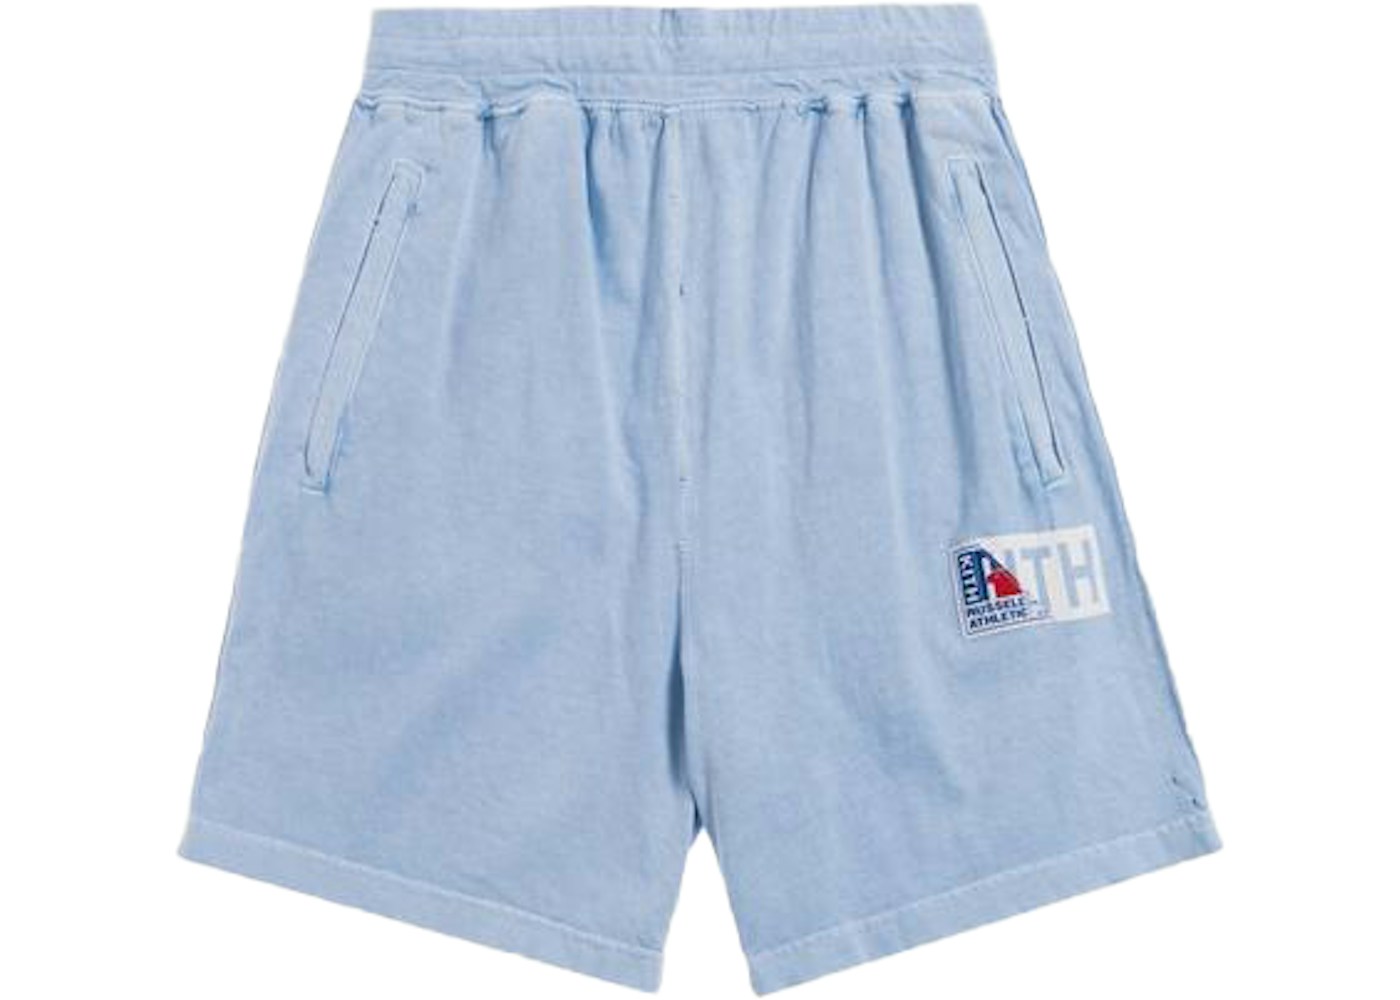 Kith x Russell Athletic Vintage Shorts Chambray Blue - SS19